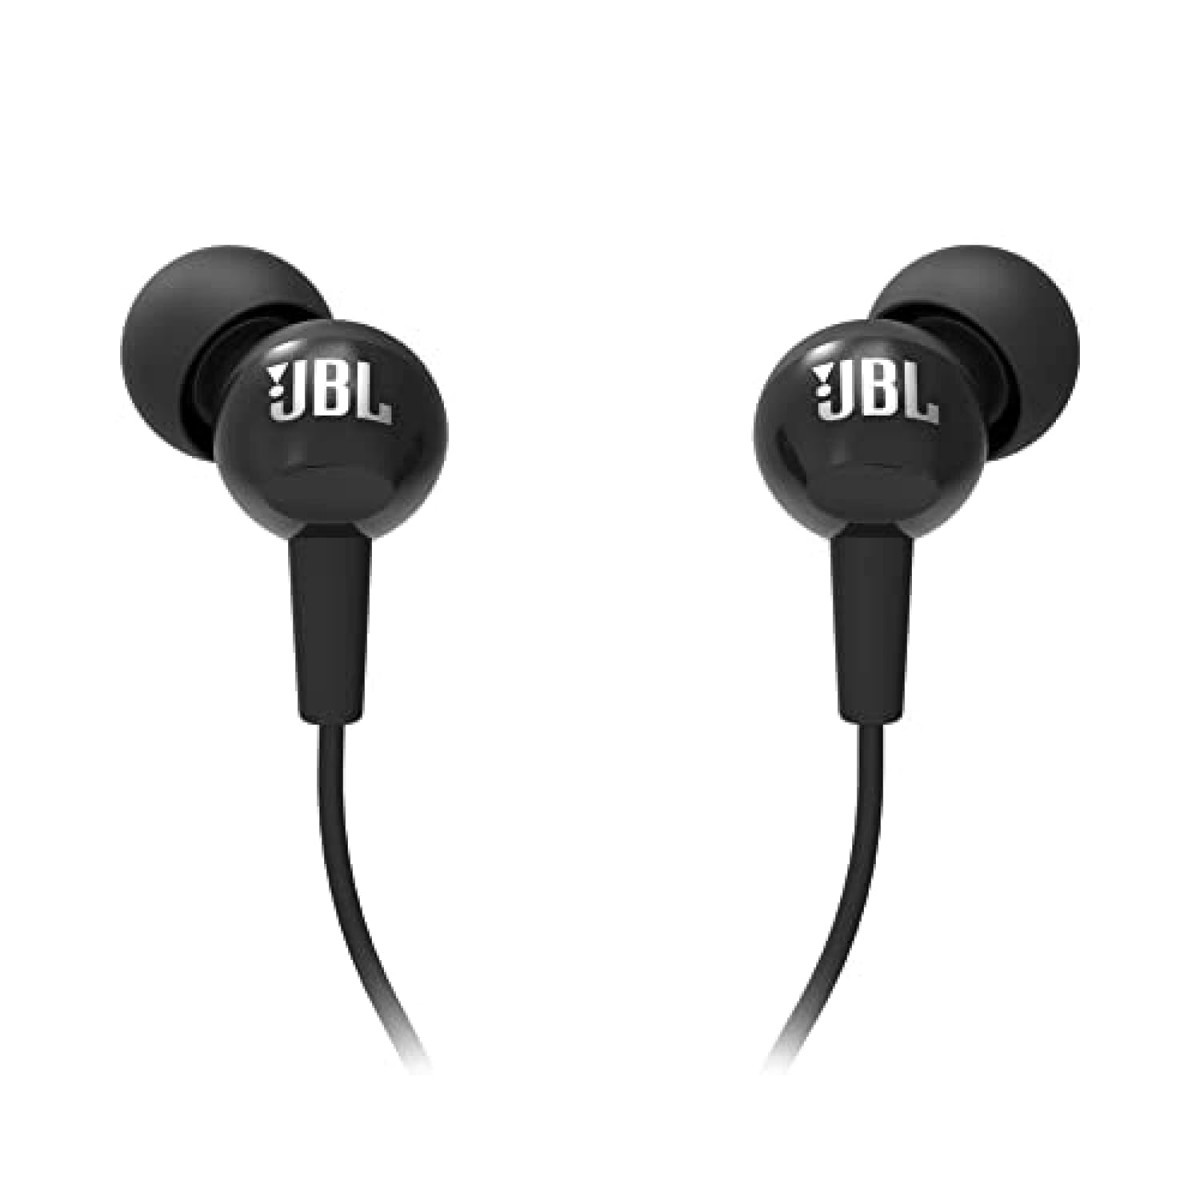 JBL C100SI Wired In Ear Headphones with Mic JBL Pure Bass Sound One Button Multi-function Remote Premium Metallic Finish Angled Buds for Comfort fit Black